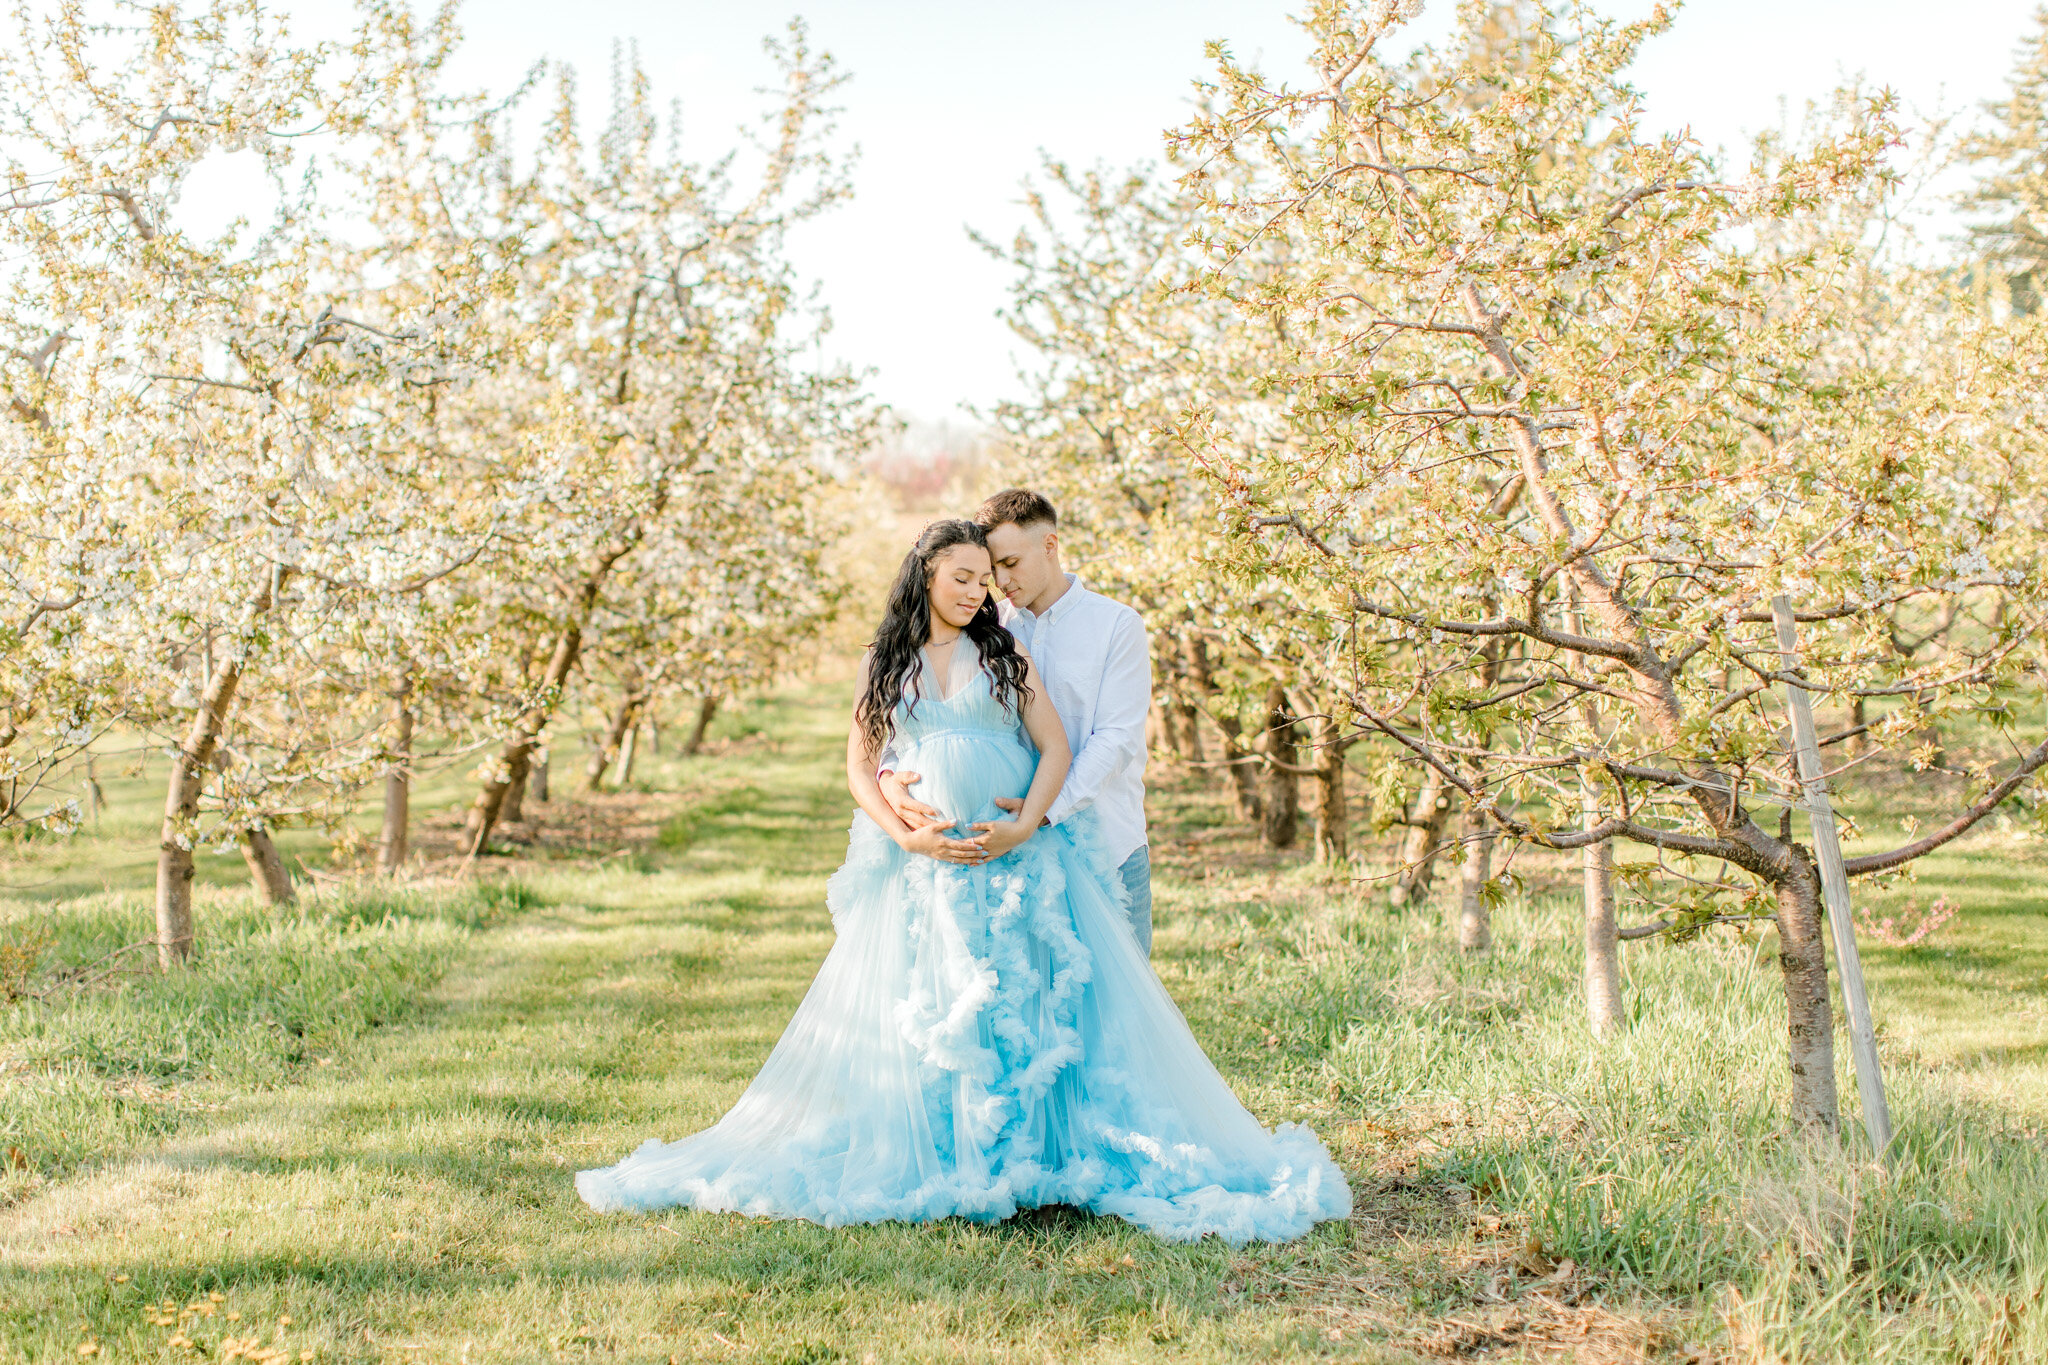 Spring Maternity Session in the Apple Blossoms | West Michigan Maternity Photographer